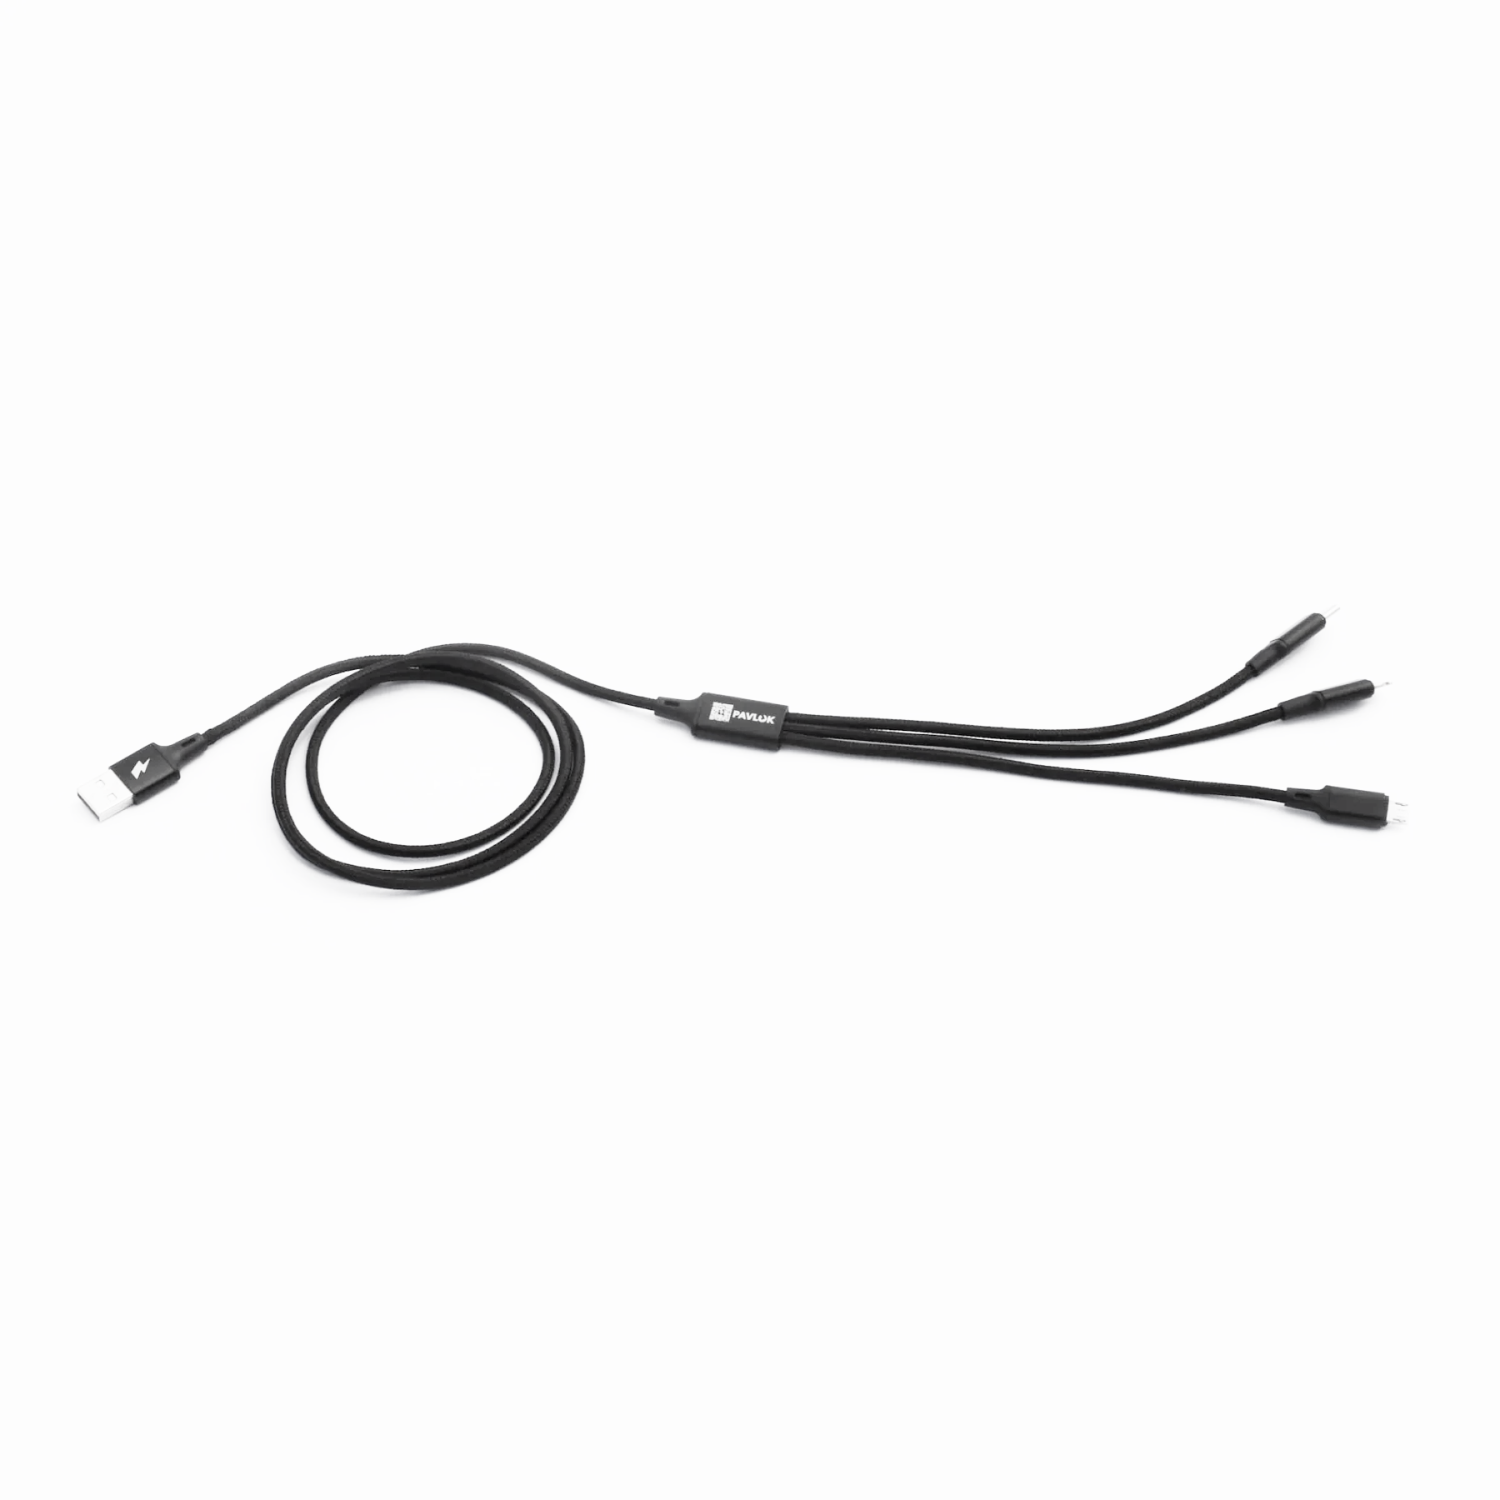 Type 2 EV Charging Cable 22kW - Hydra EVC